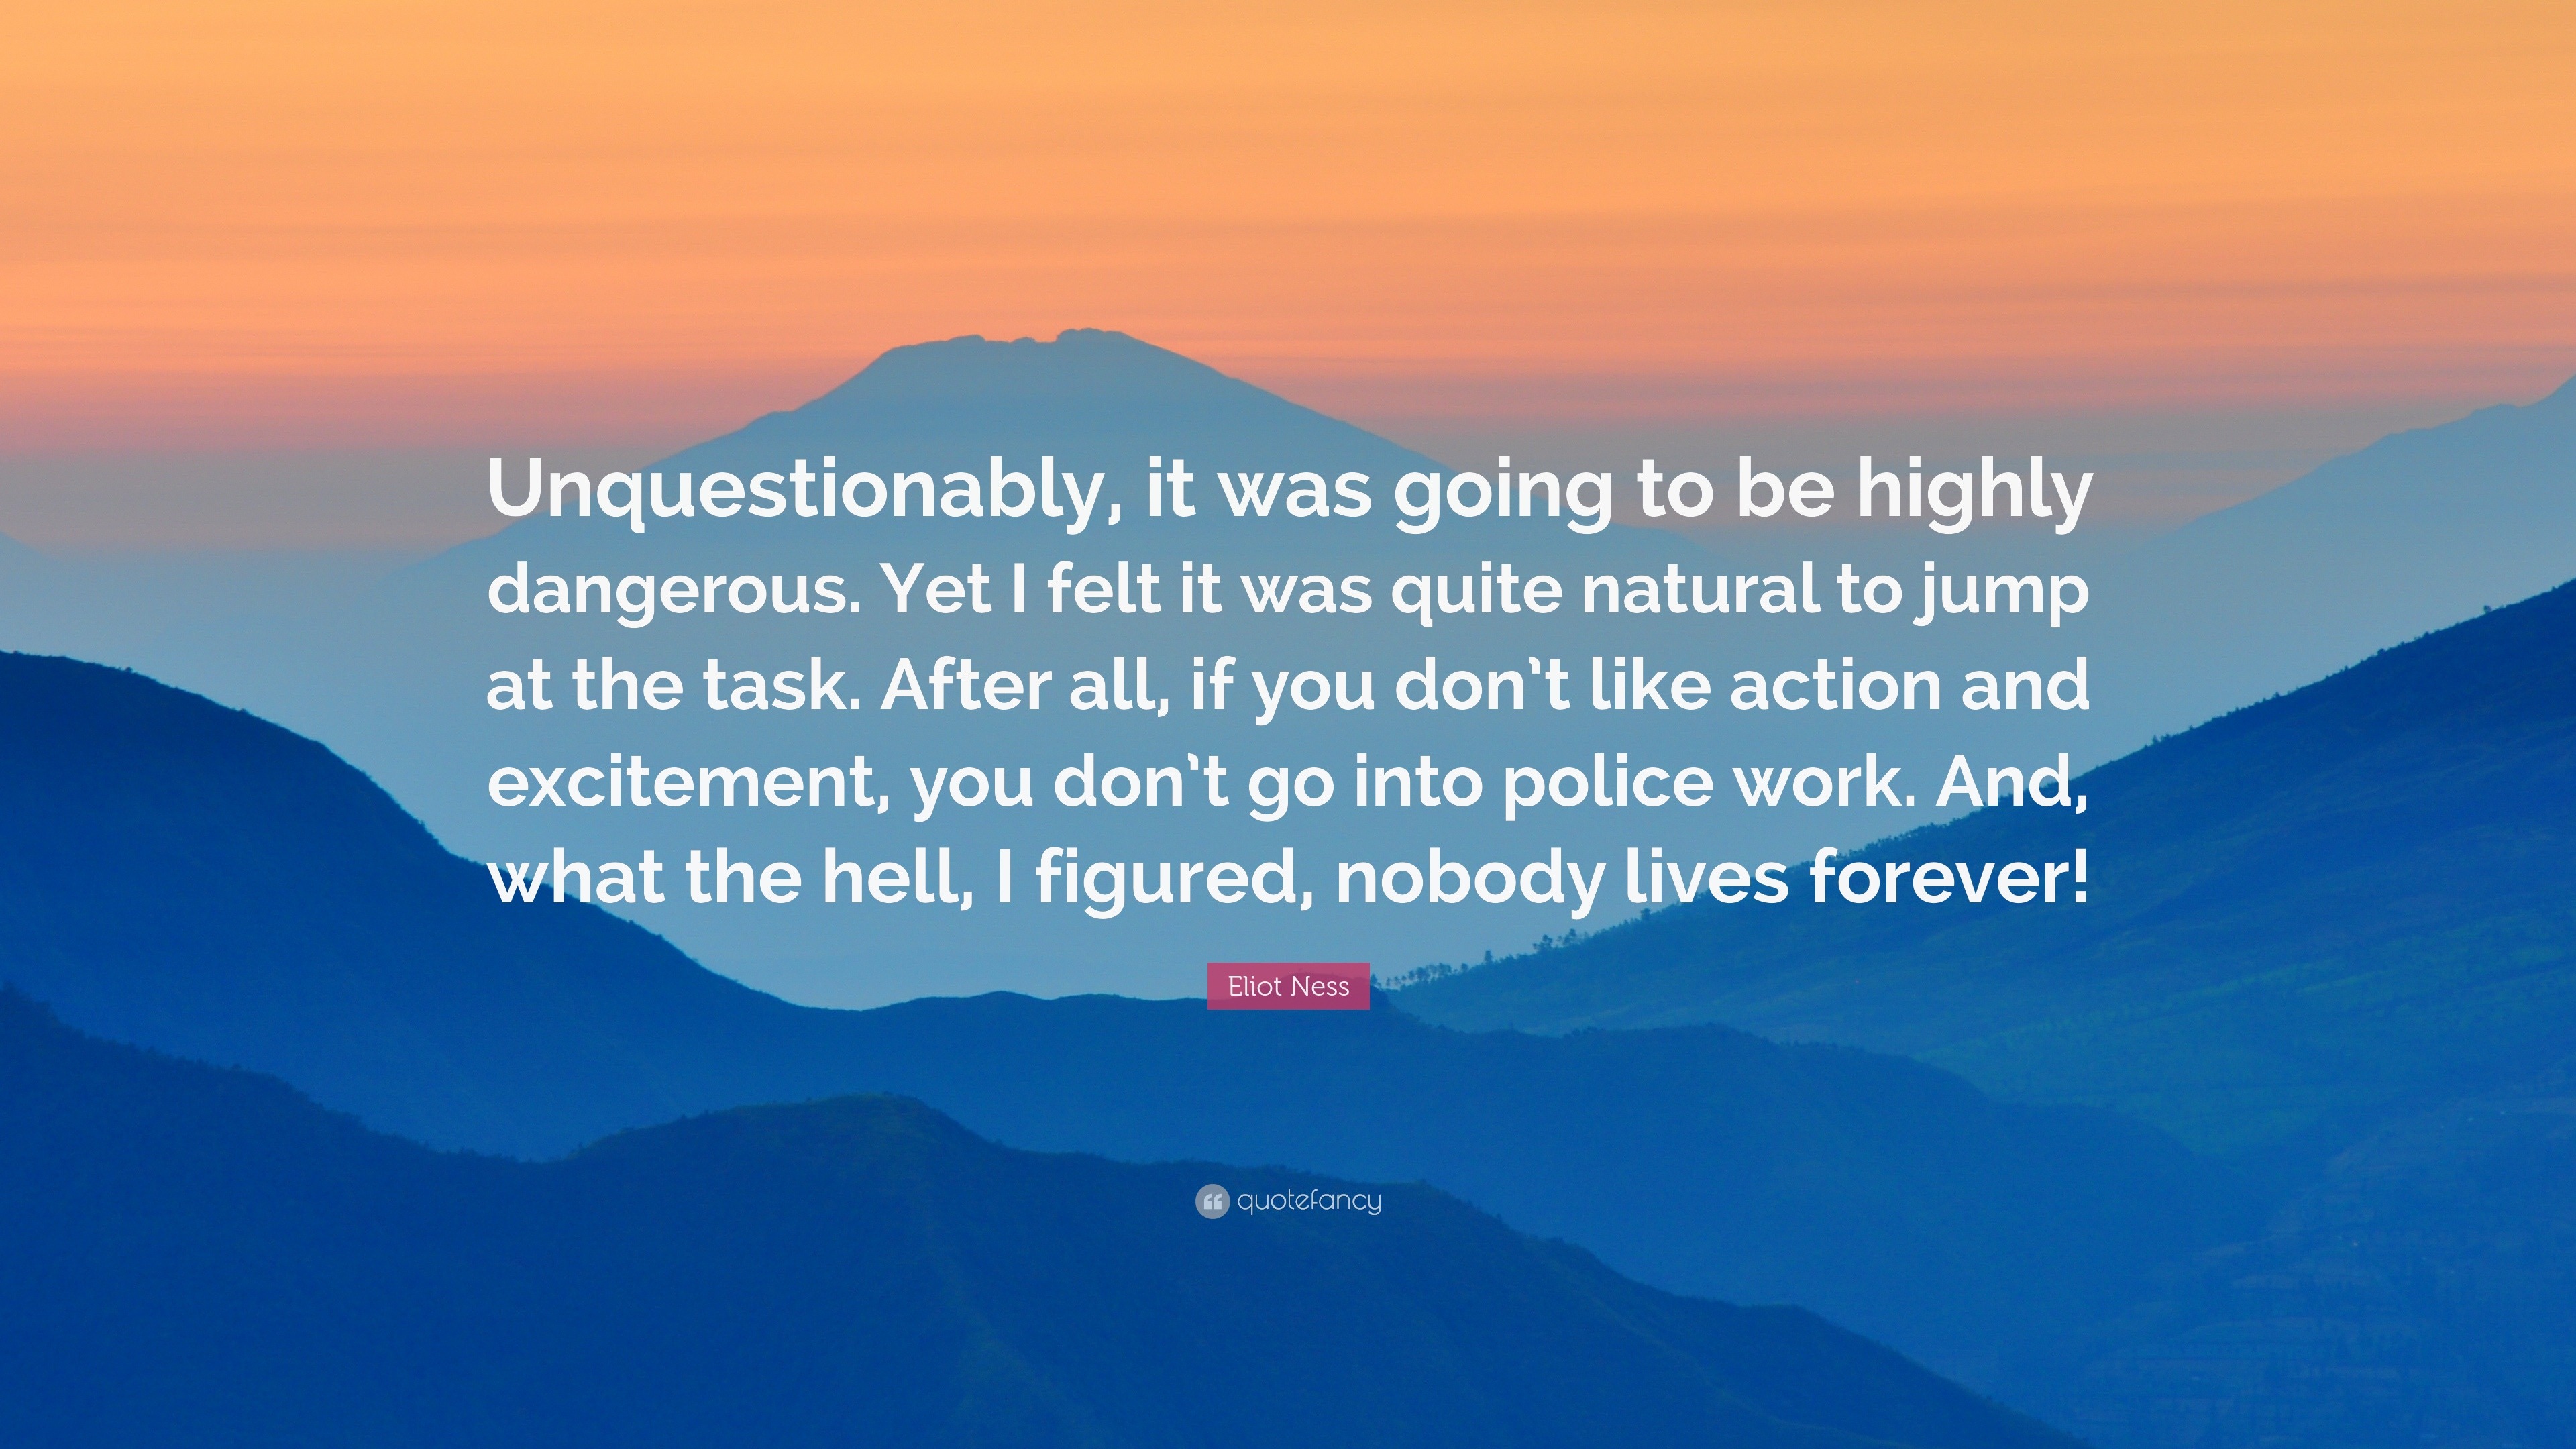 Eliot Ness Quote: “Unquestionably, it was going to be highly